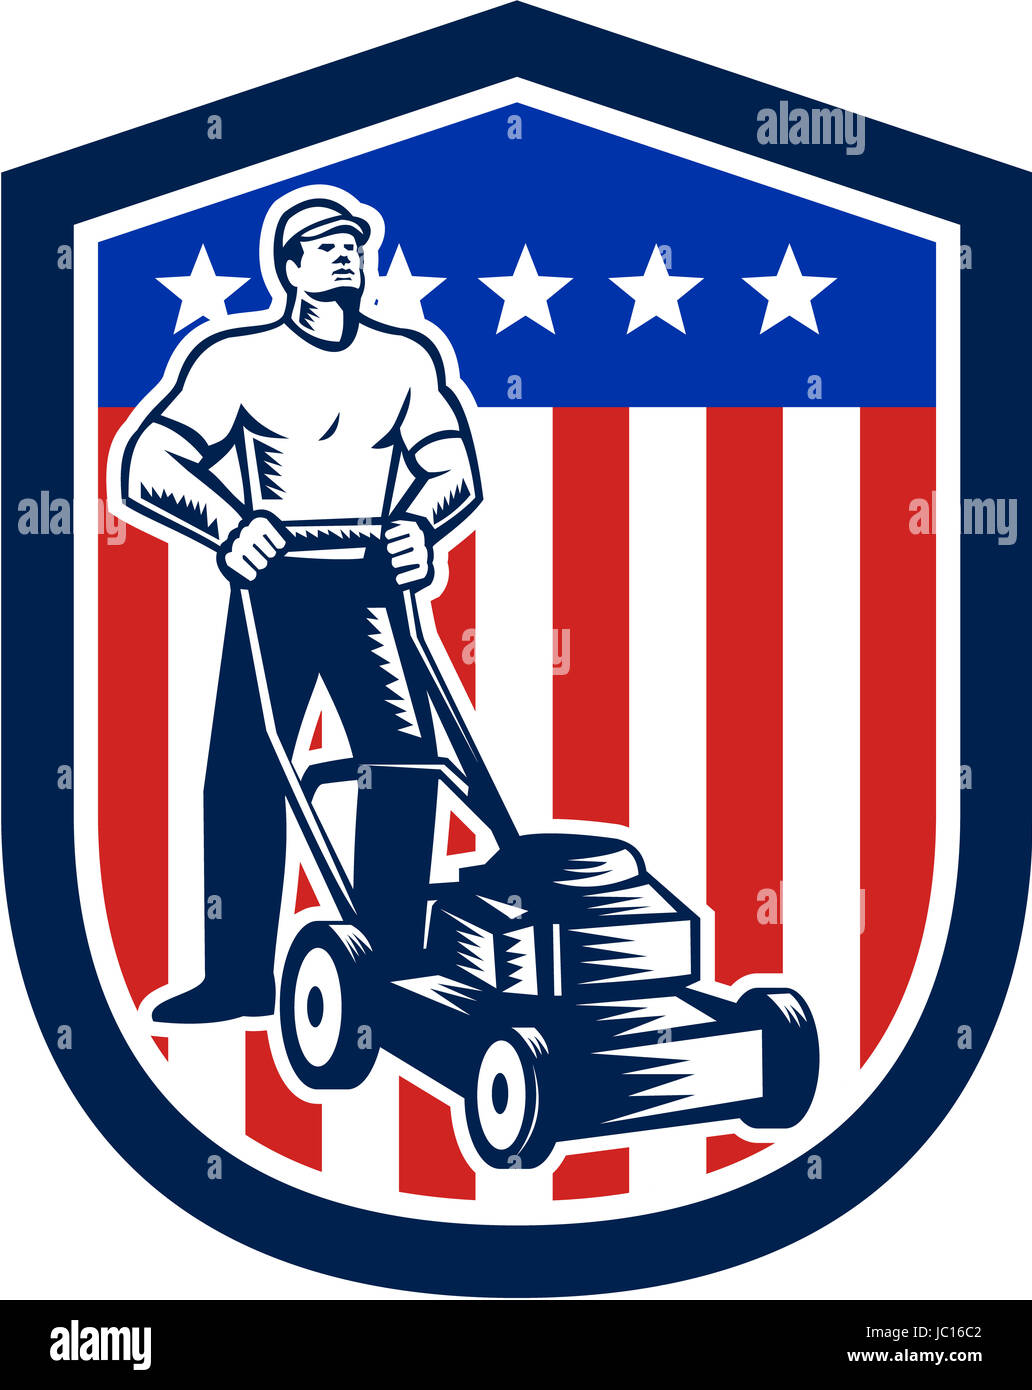 Illustration of male gardener mowing with lawn mower in american flag stars stripes set inside a shield done in retro woodcut style. Stock Photo